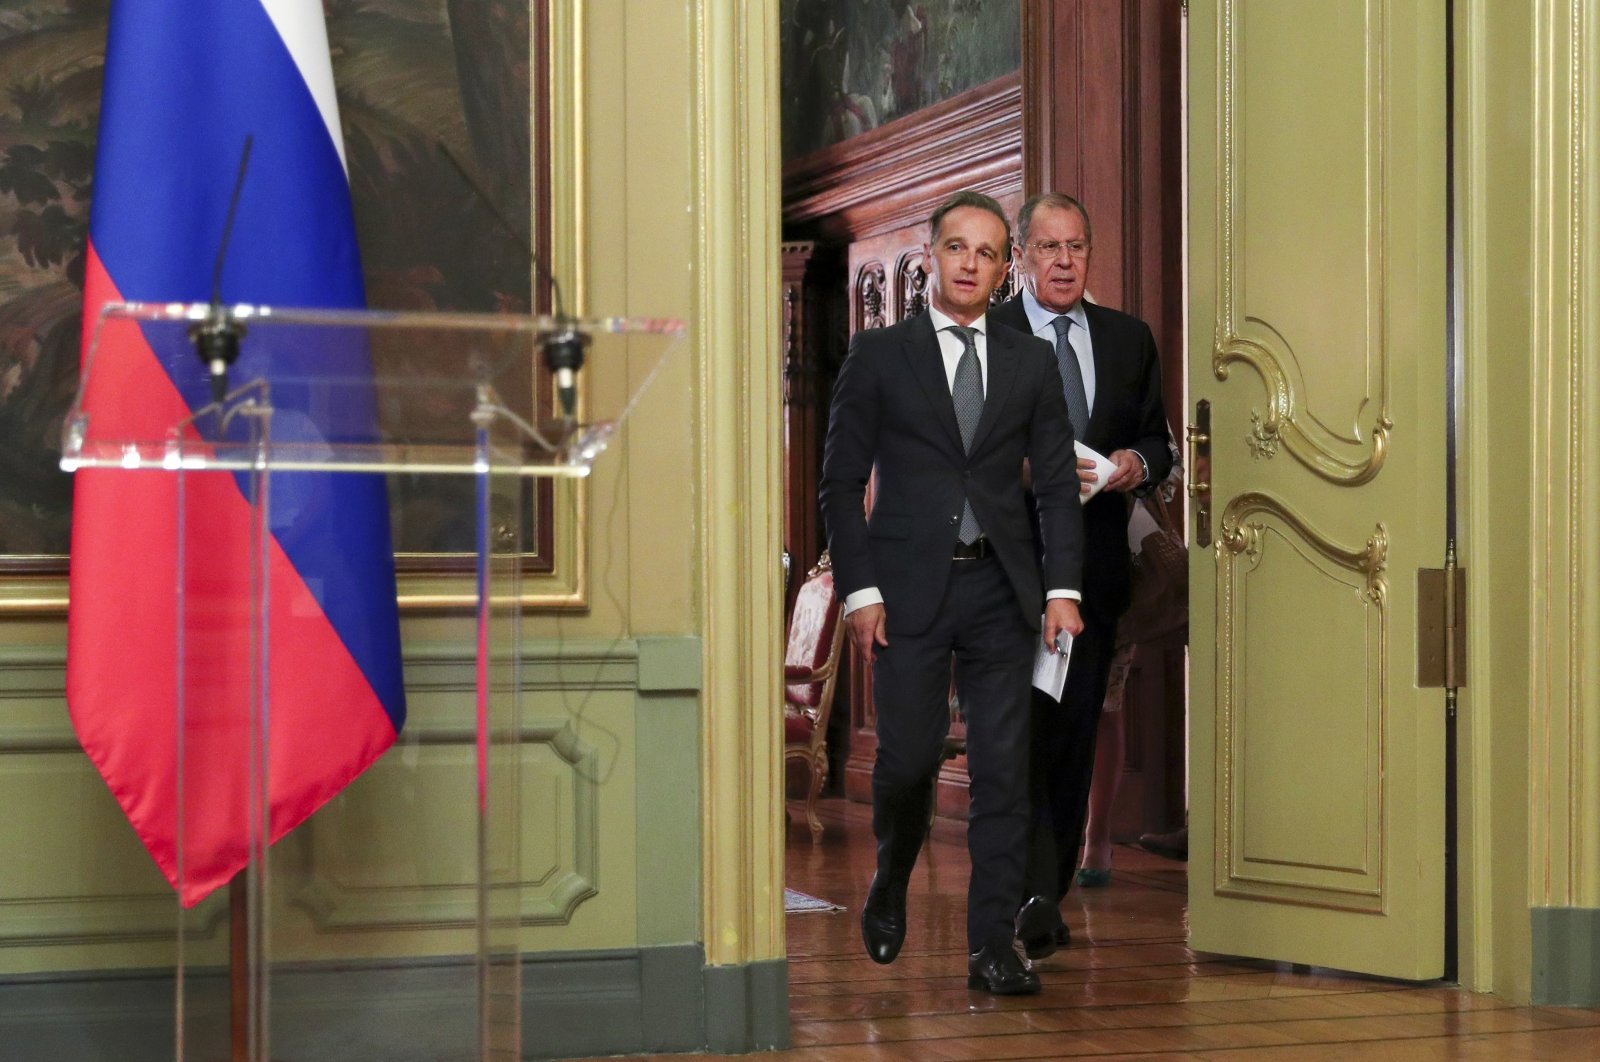 Russian Foreign Minister Sergey Lavrov (R), and German Foreign Minister Heiko Maas, enter a hall to attend their joint news conference following talks in Moscow, Russia, Aug. 11, 2020. (Russian Foreign Ministry Press Service via AP)